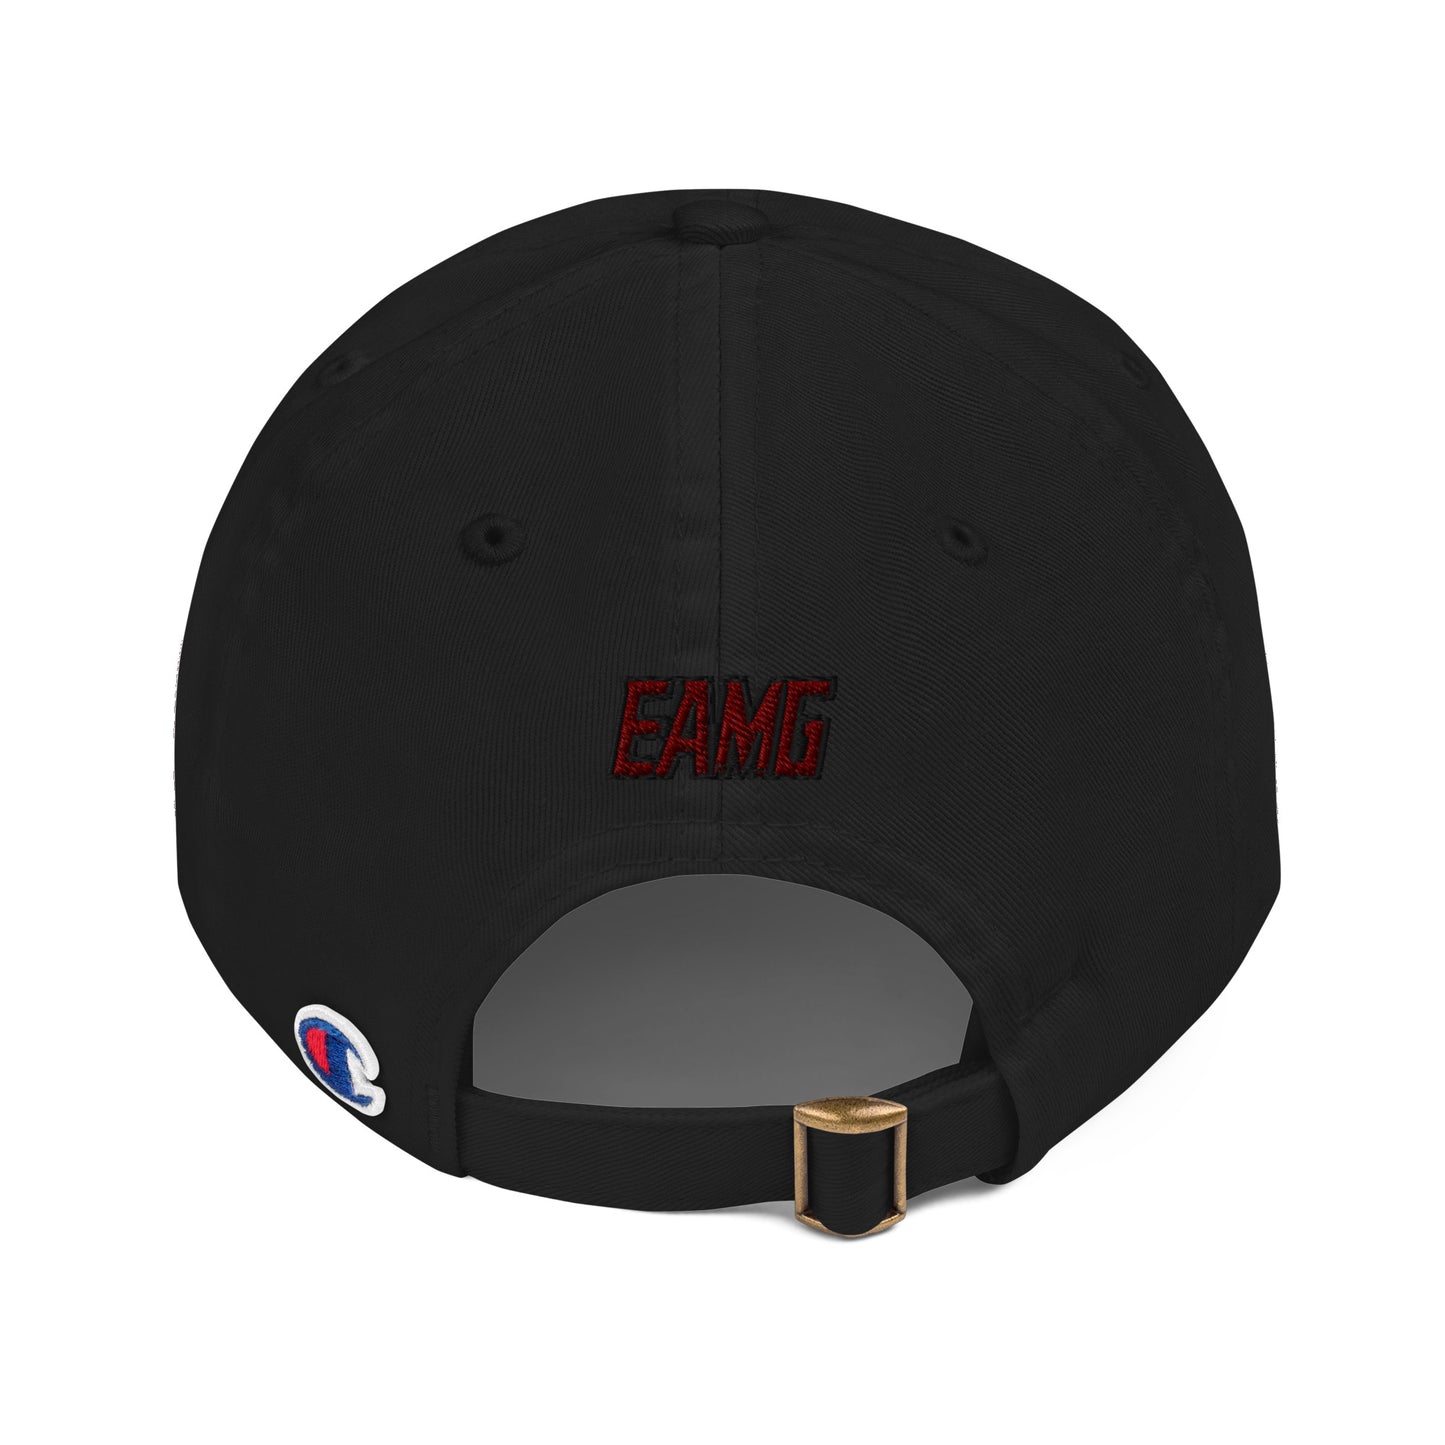 TG Embroidered Champion Dad Cap